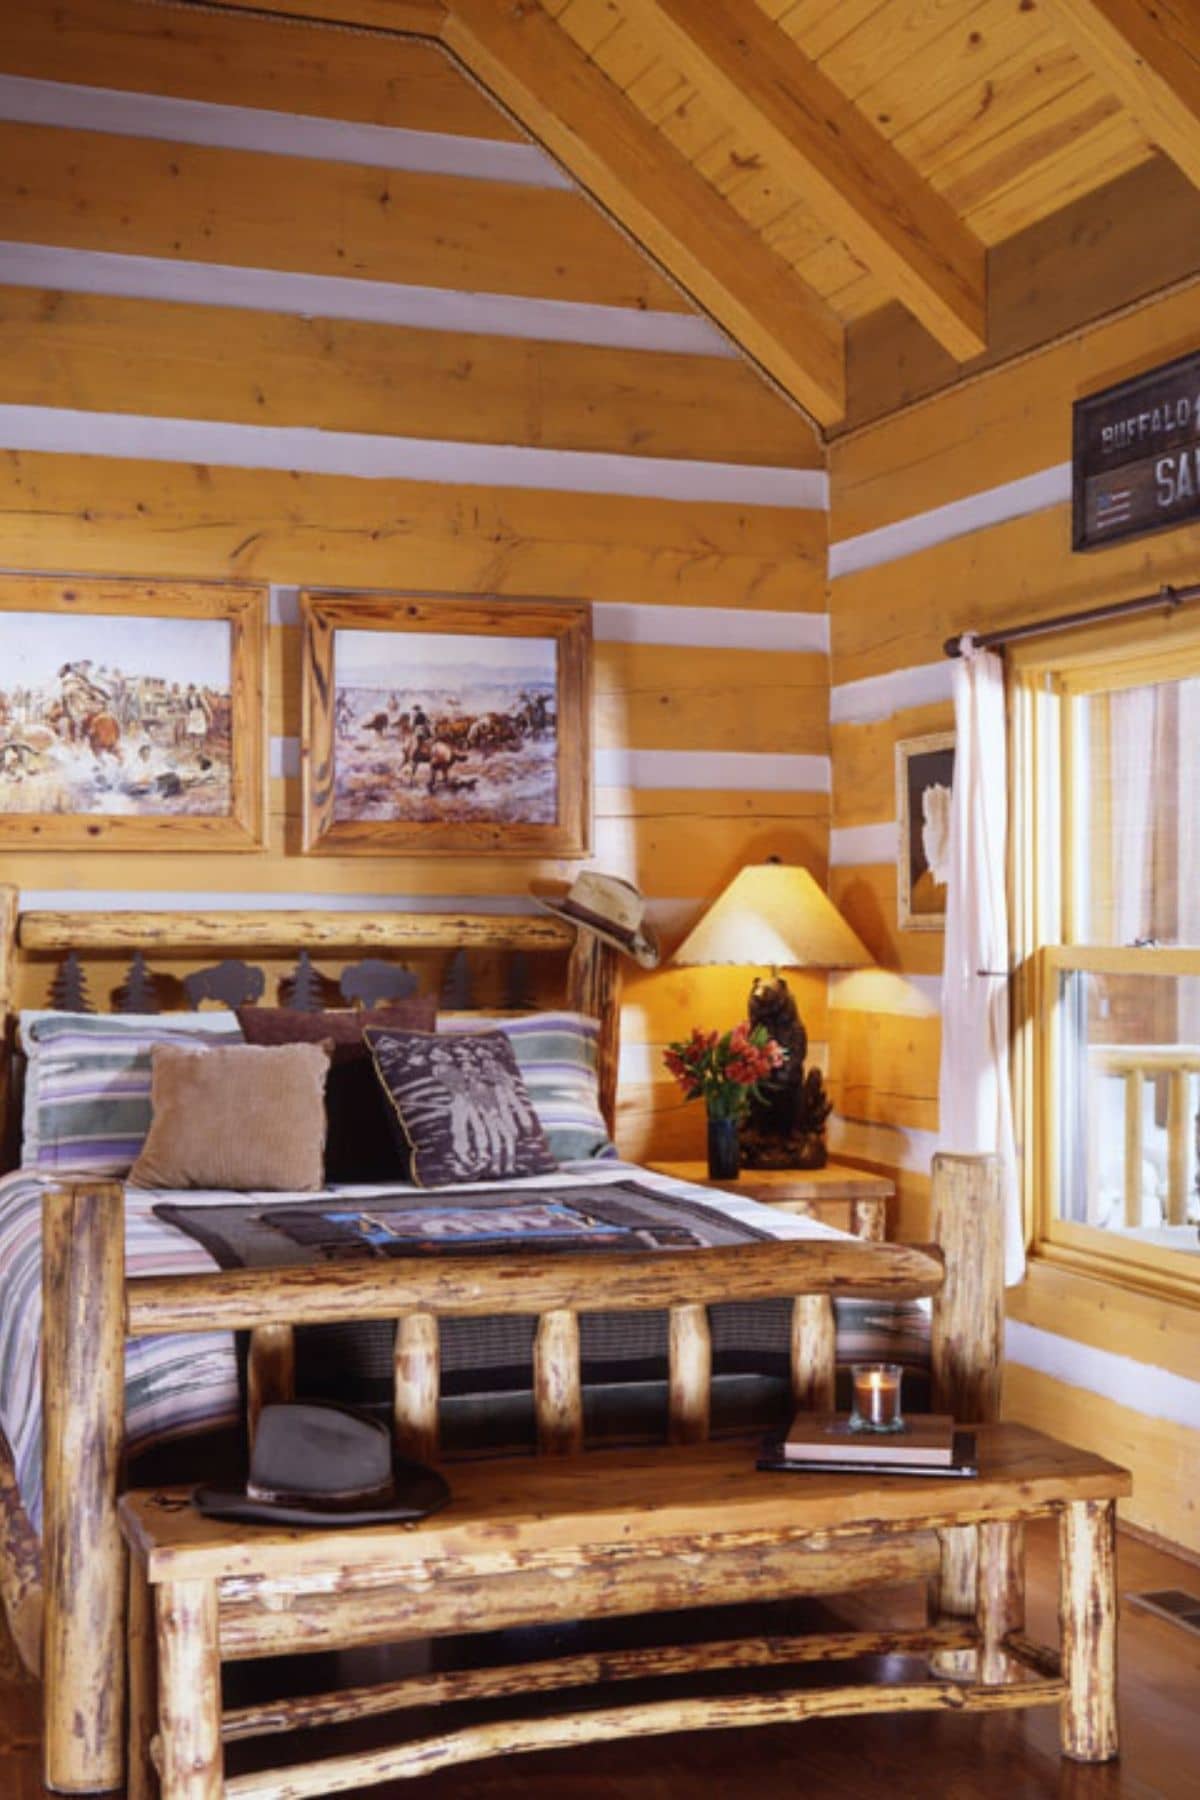 log bed against log cabin wall with large window on right